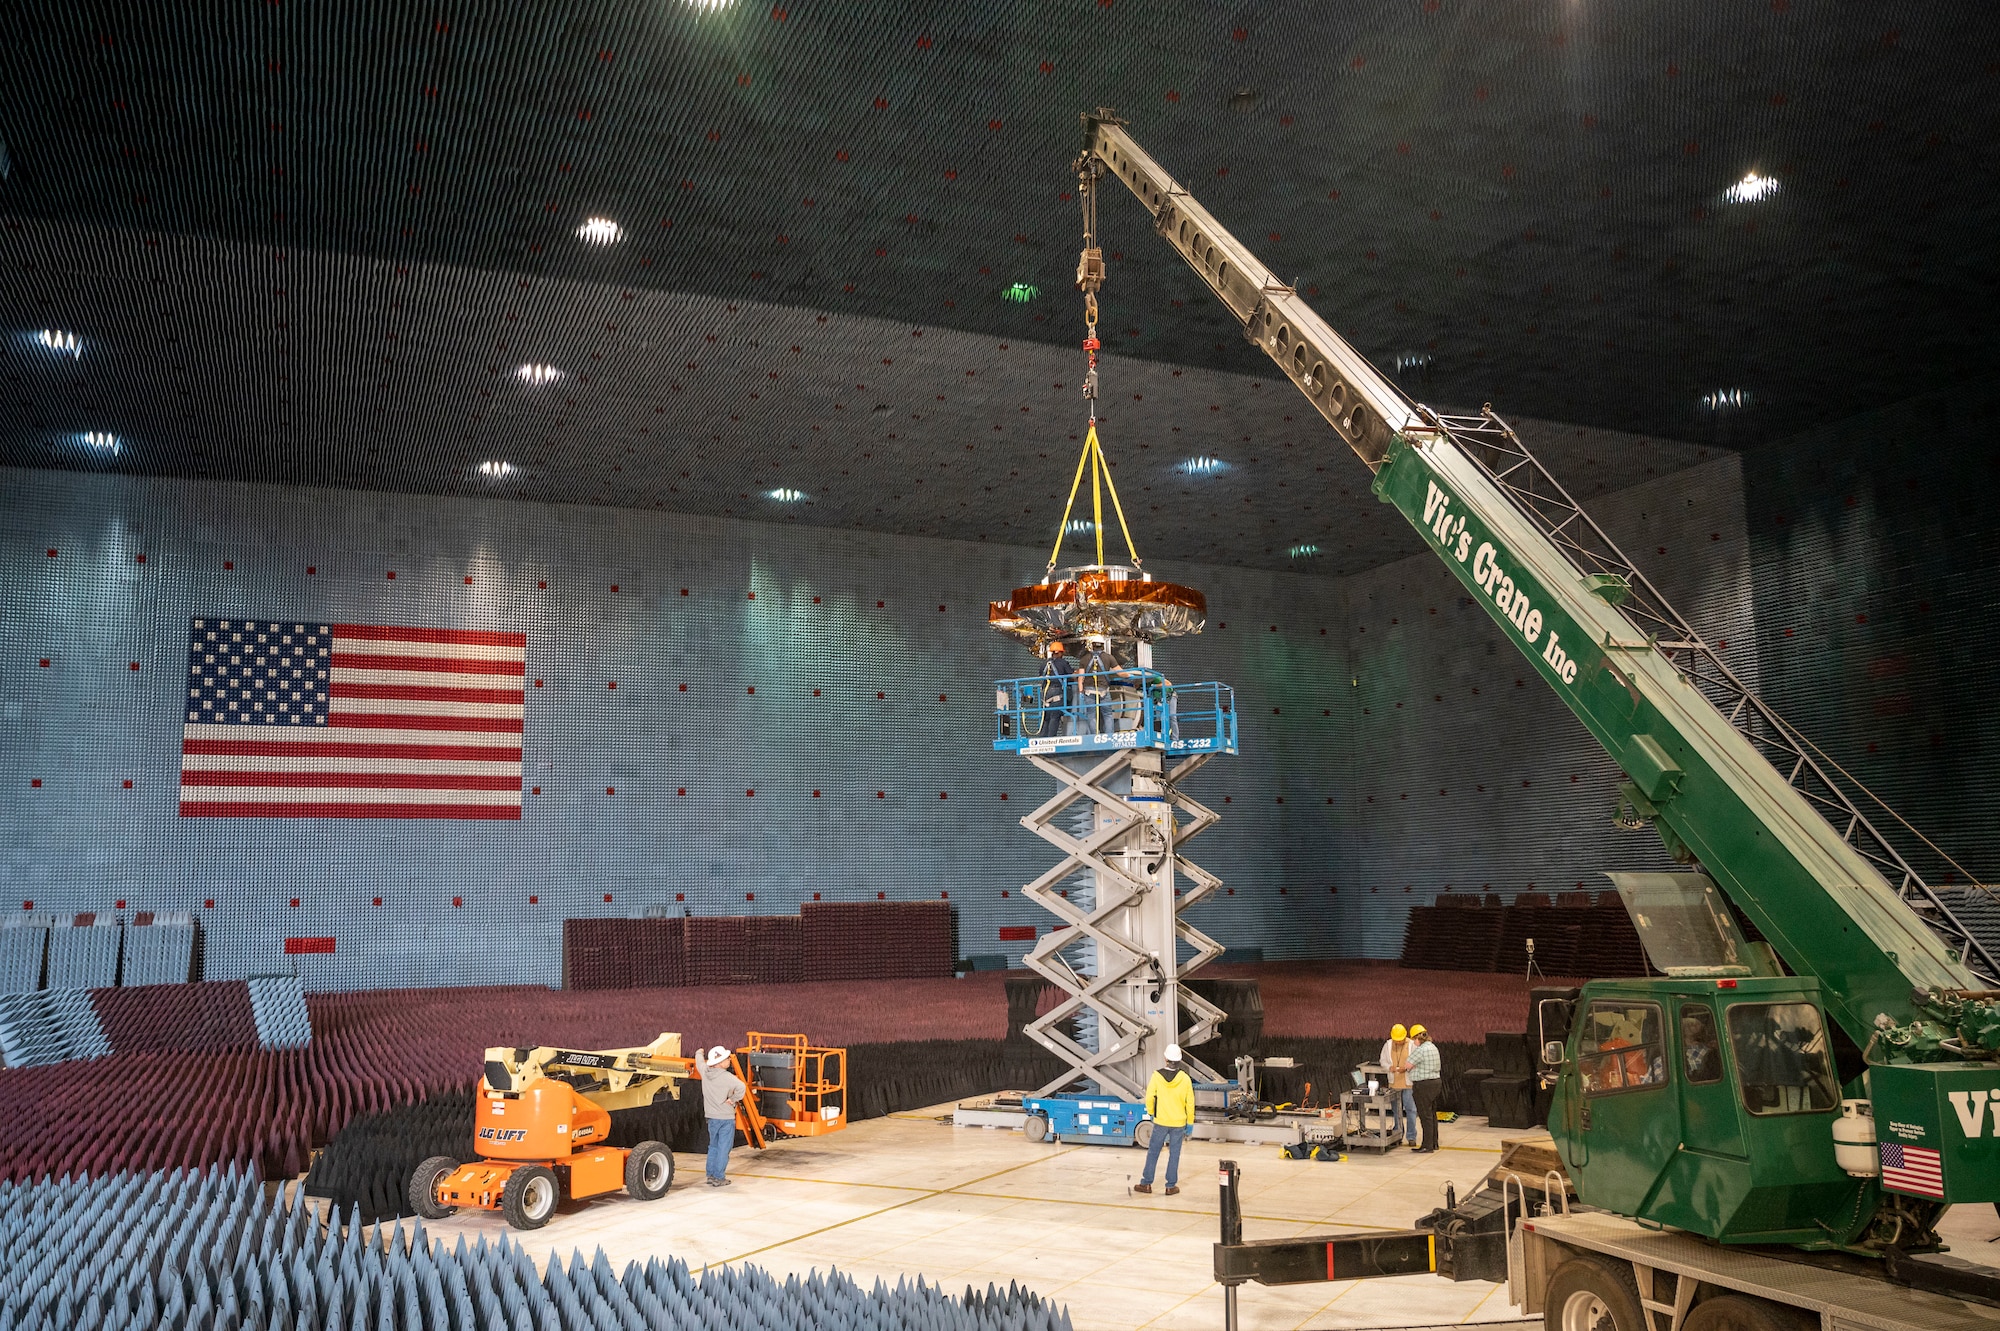 The Benefield Anechoic Facility recently tested its first space satellite in decades. Anticipated to launch in late 2023, Navigation Technology Satellite-3 (NTS-3) will be the Department of Defense’s first experimental, integrated navigation satellite system in nearly 50 years.